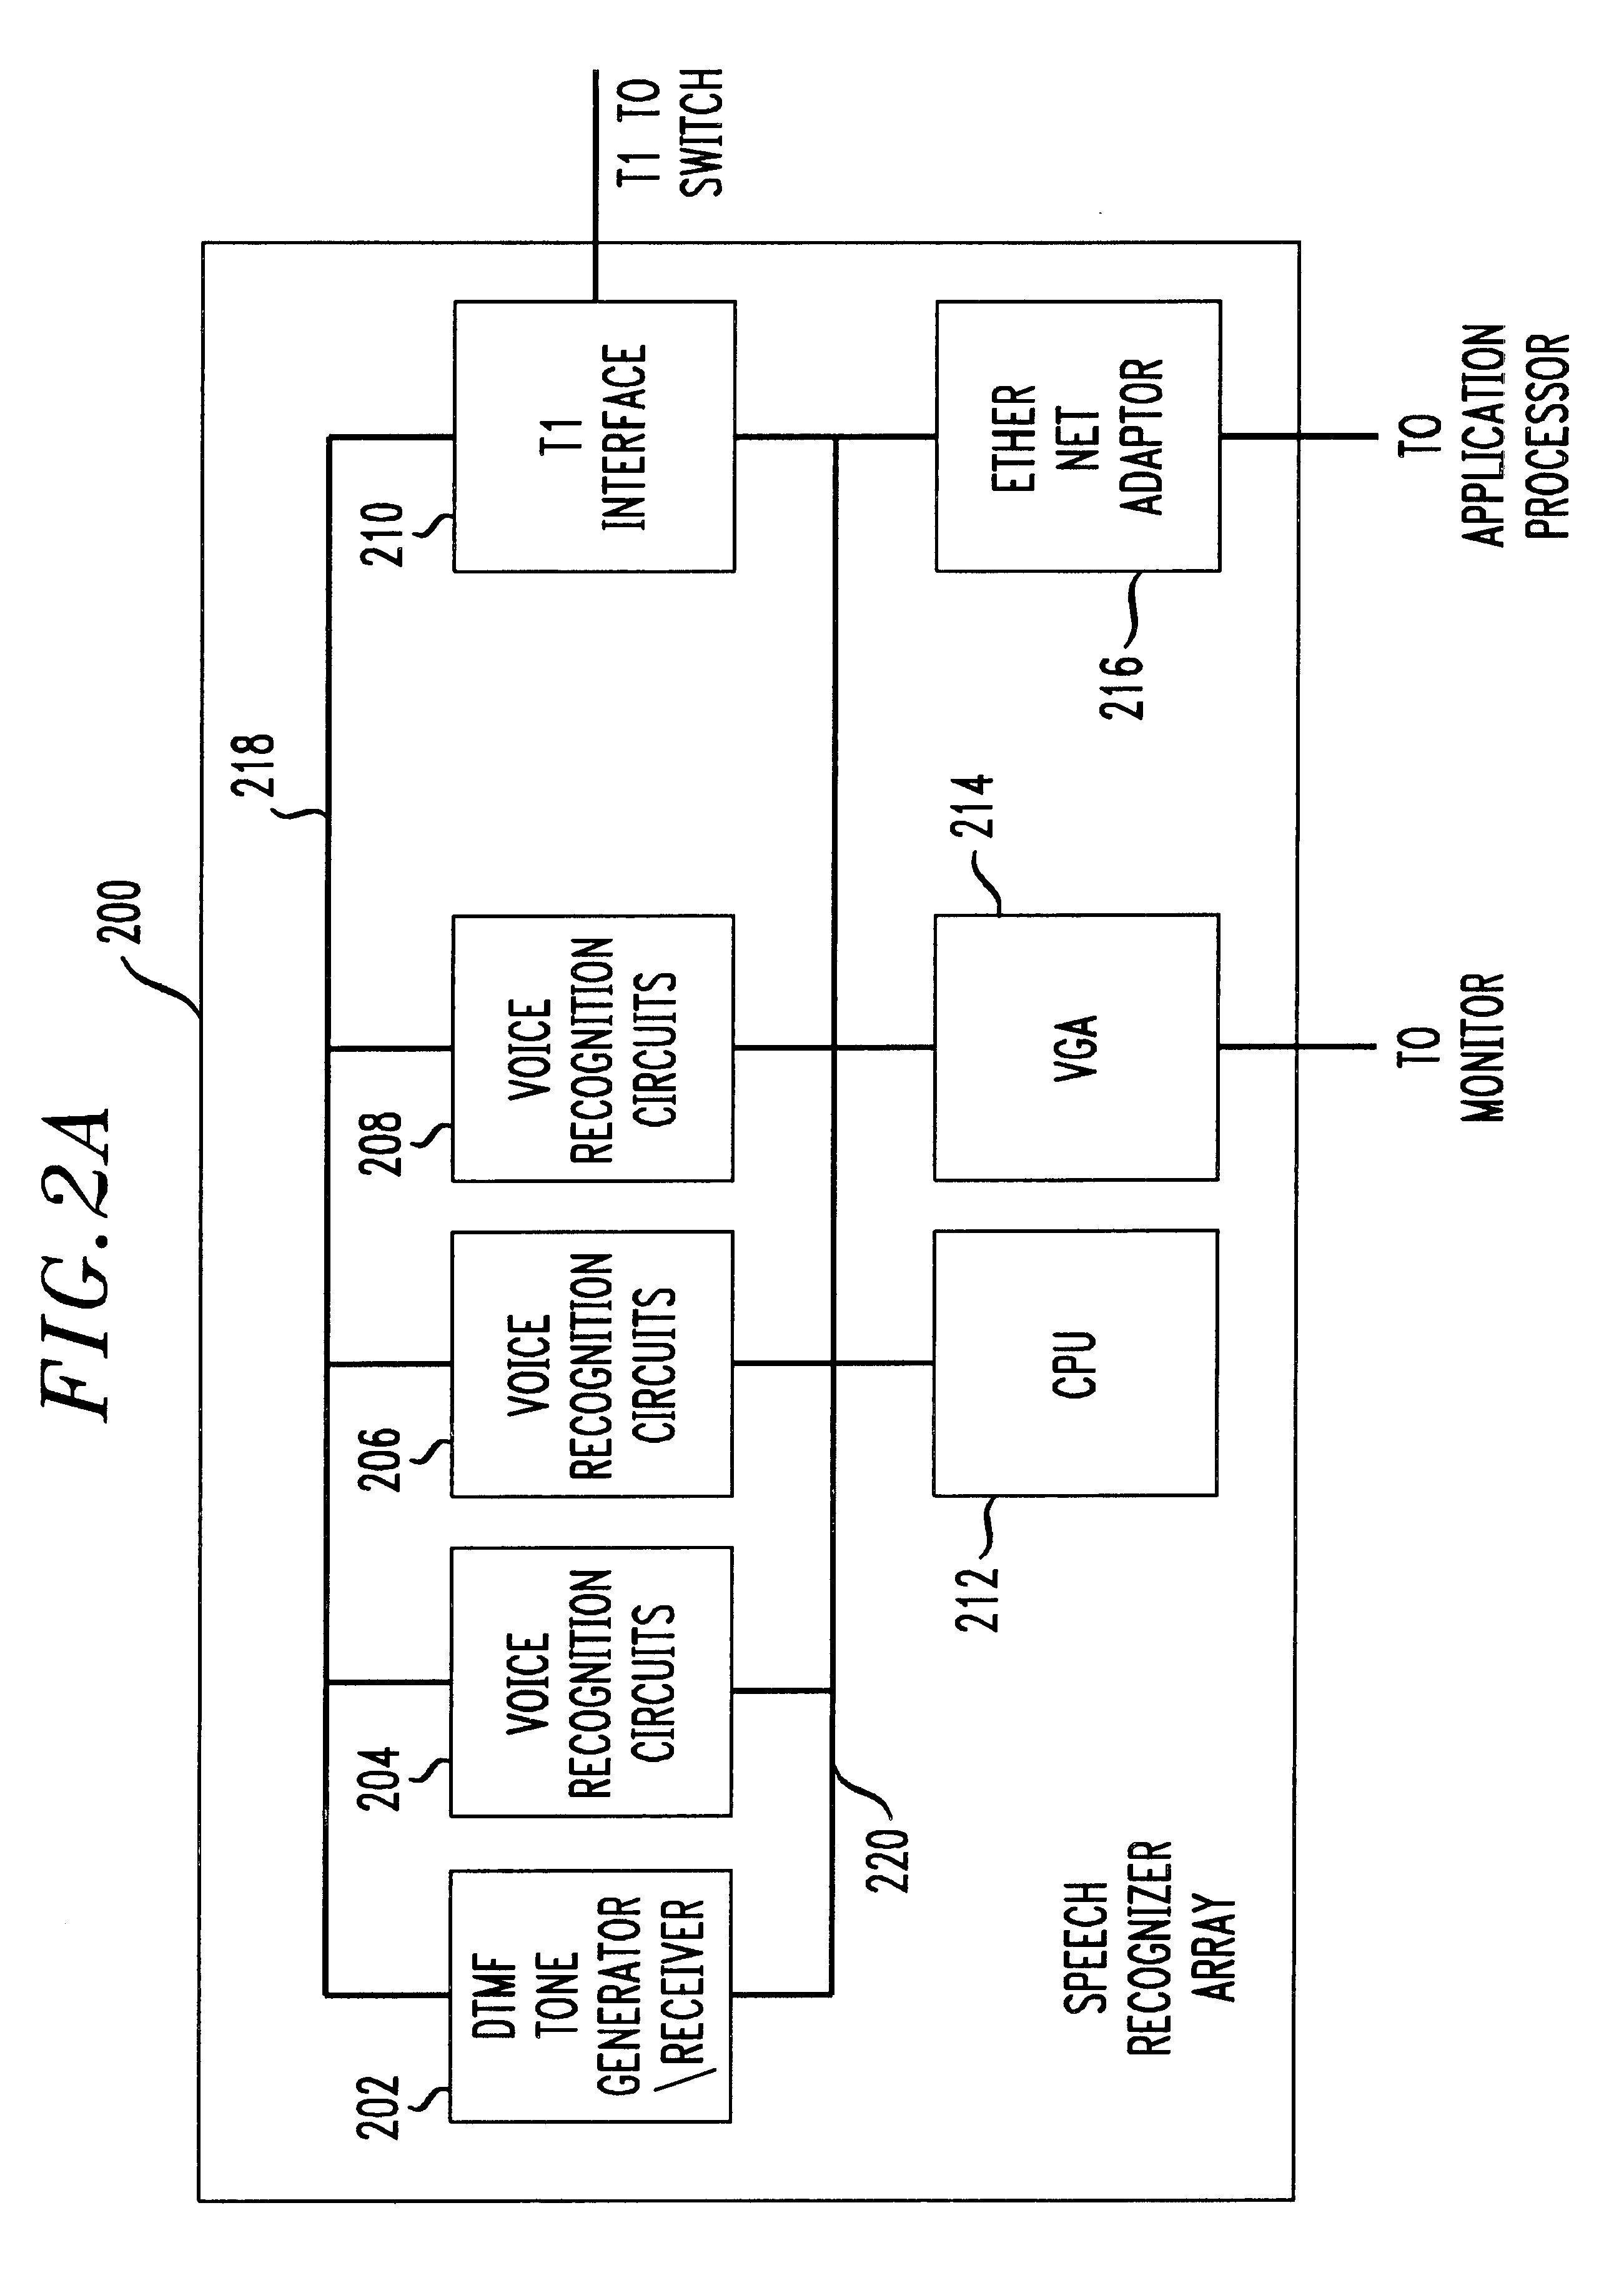 Methods and apparatus for performing speaker independent recognition of commands in parallel with speaker dependent recognition of names, words or phrases